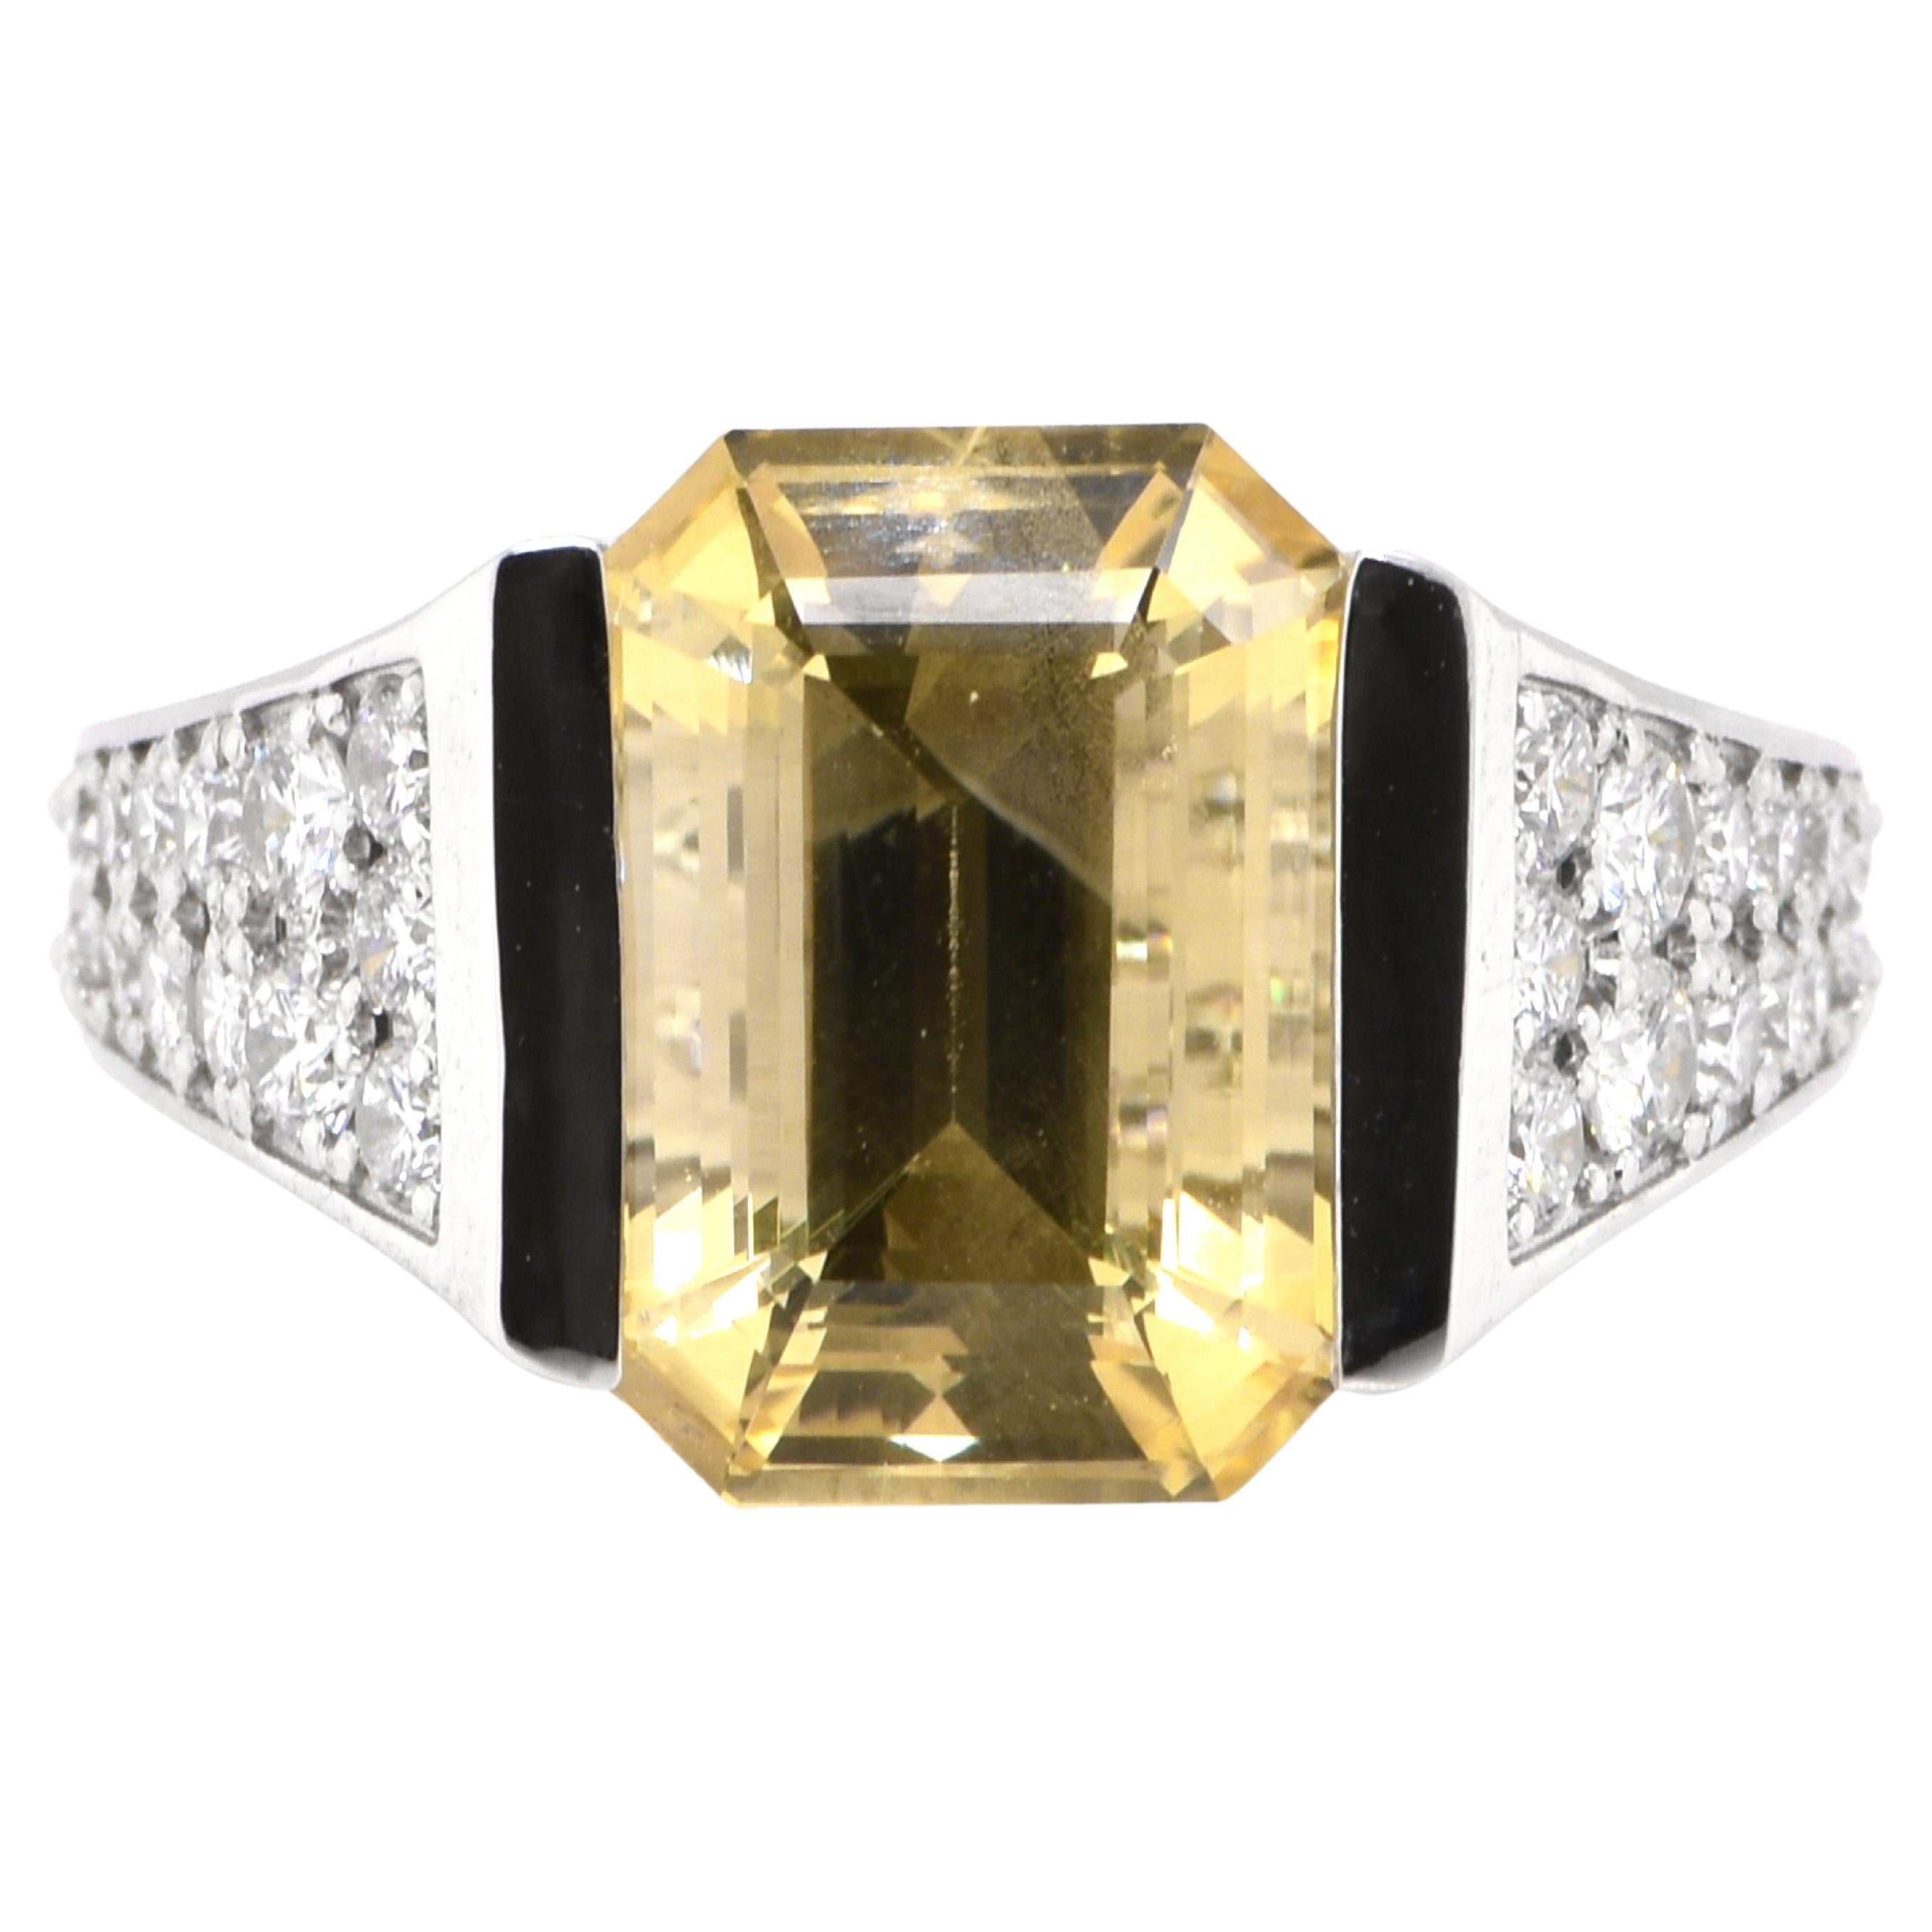 8.80 Carat Unheated / Untreated Yellow Sapphire Cocktail Ring Set in Platinum